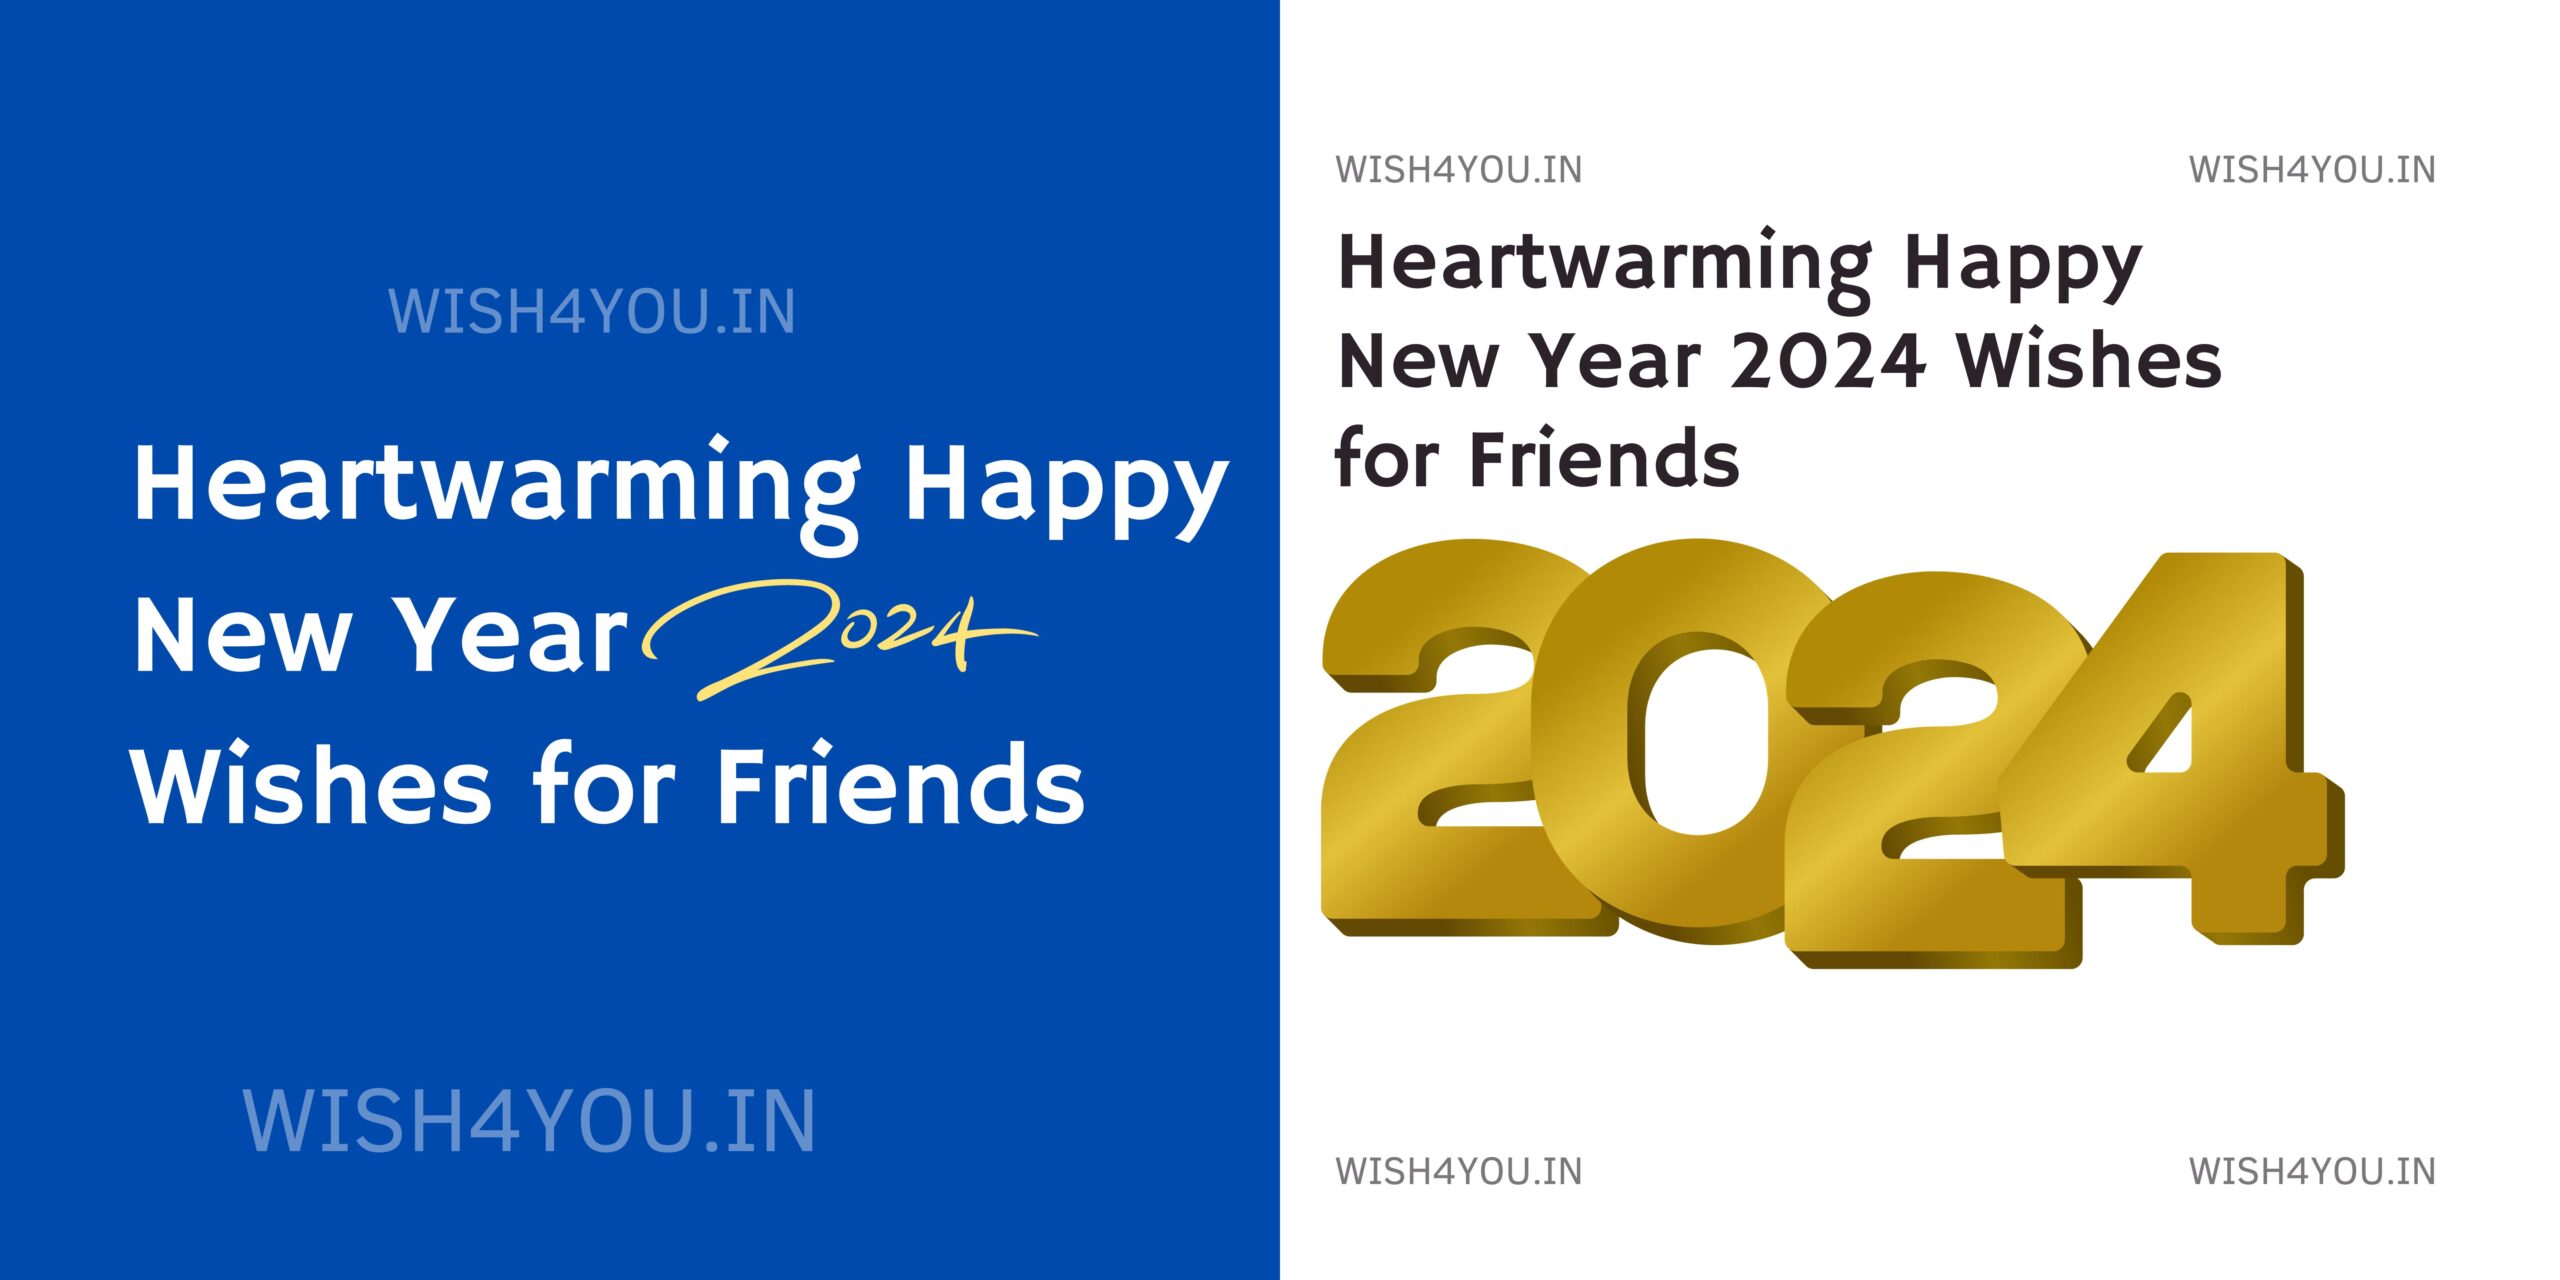 Heartwarming Happy New Year 2024 Wishes for Friends